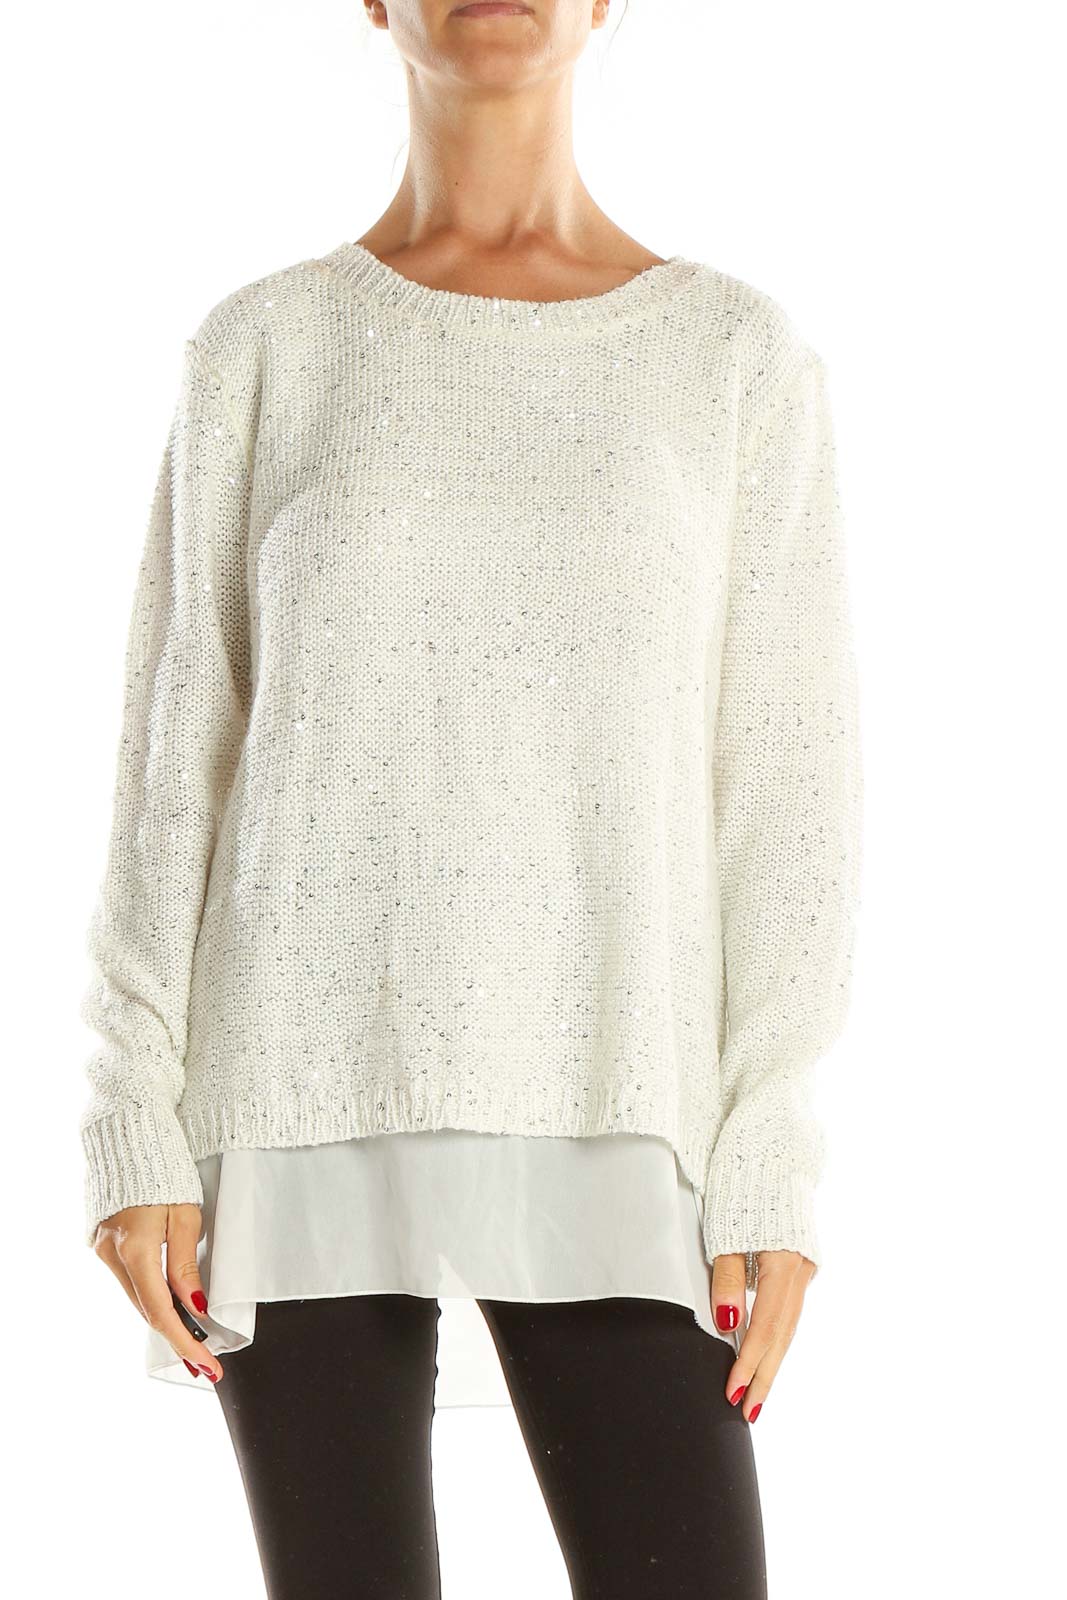 White Sequin Chic Sweater Front